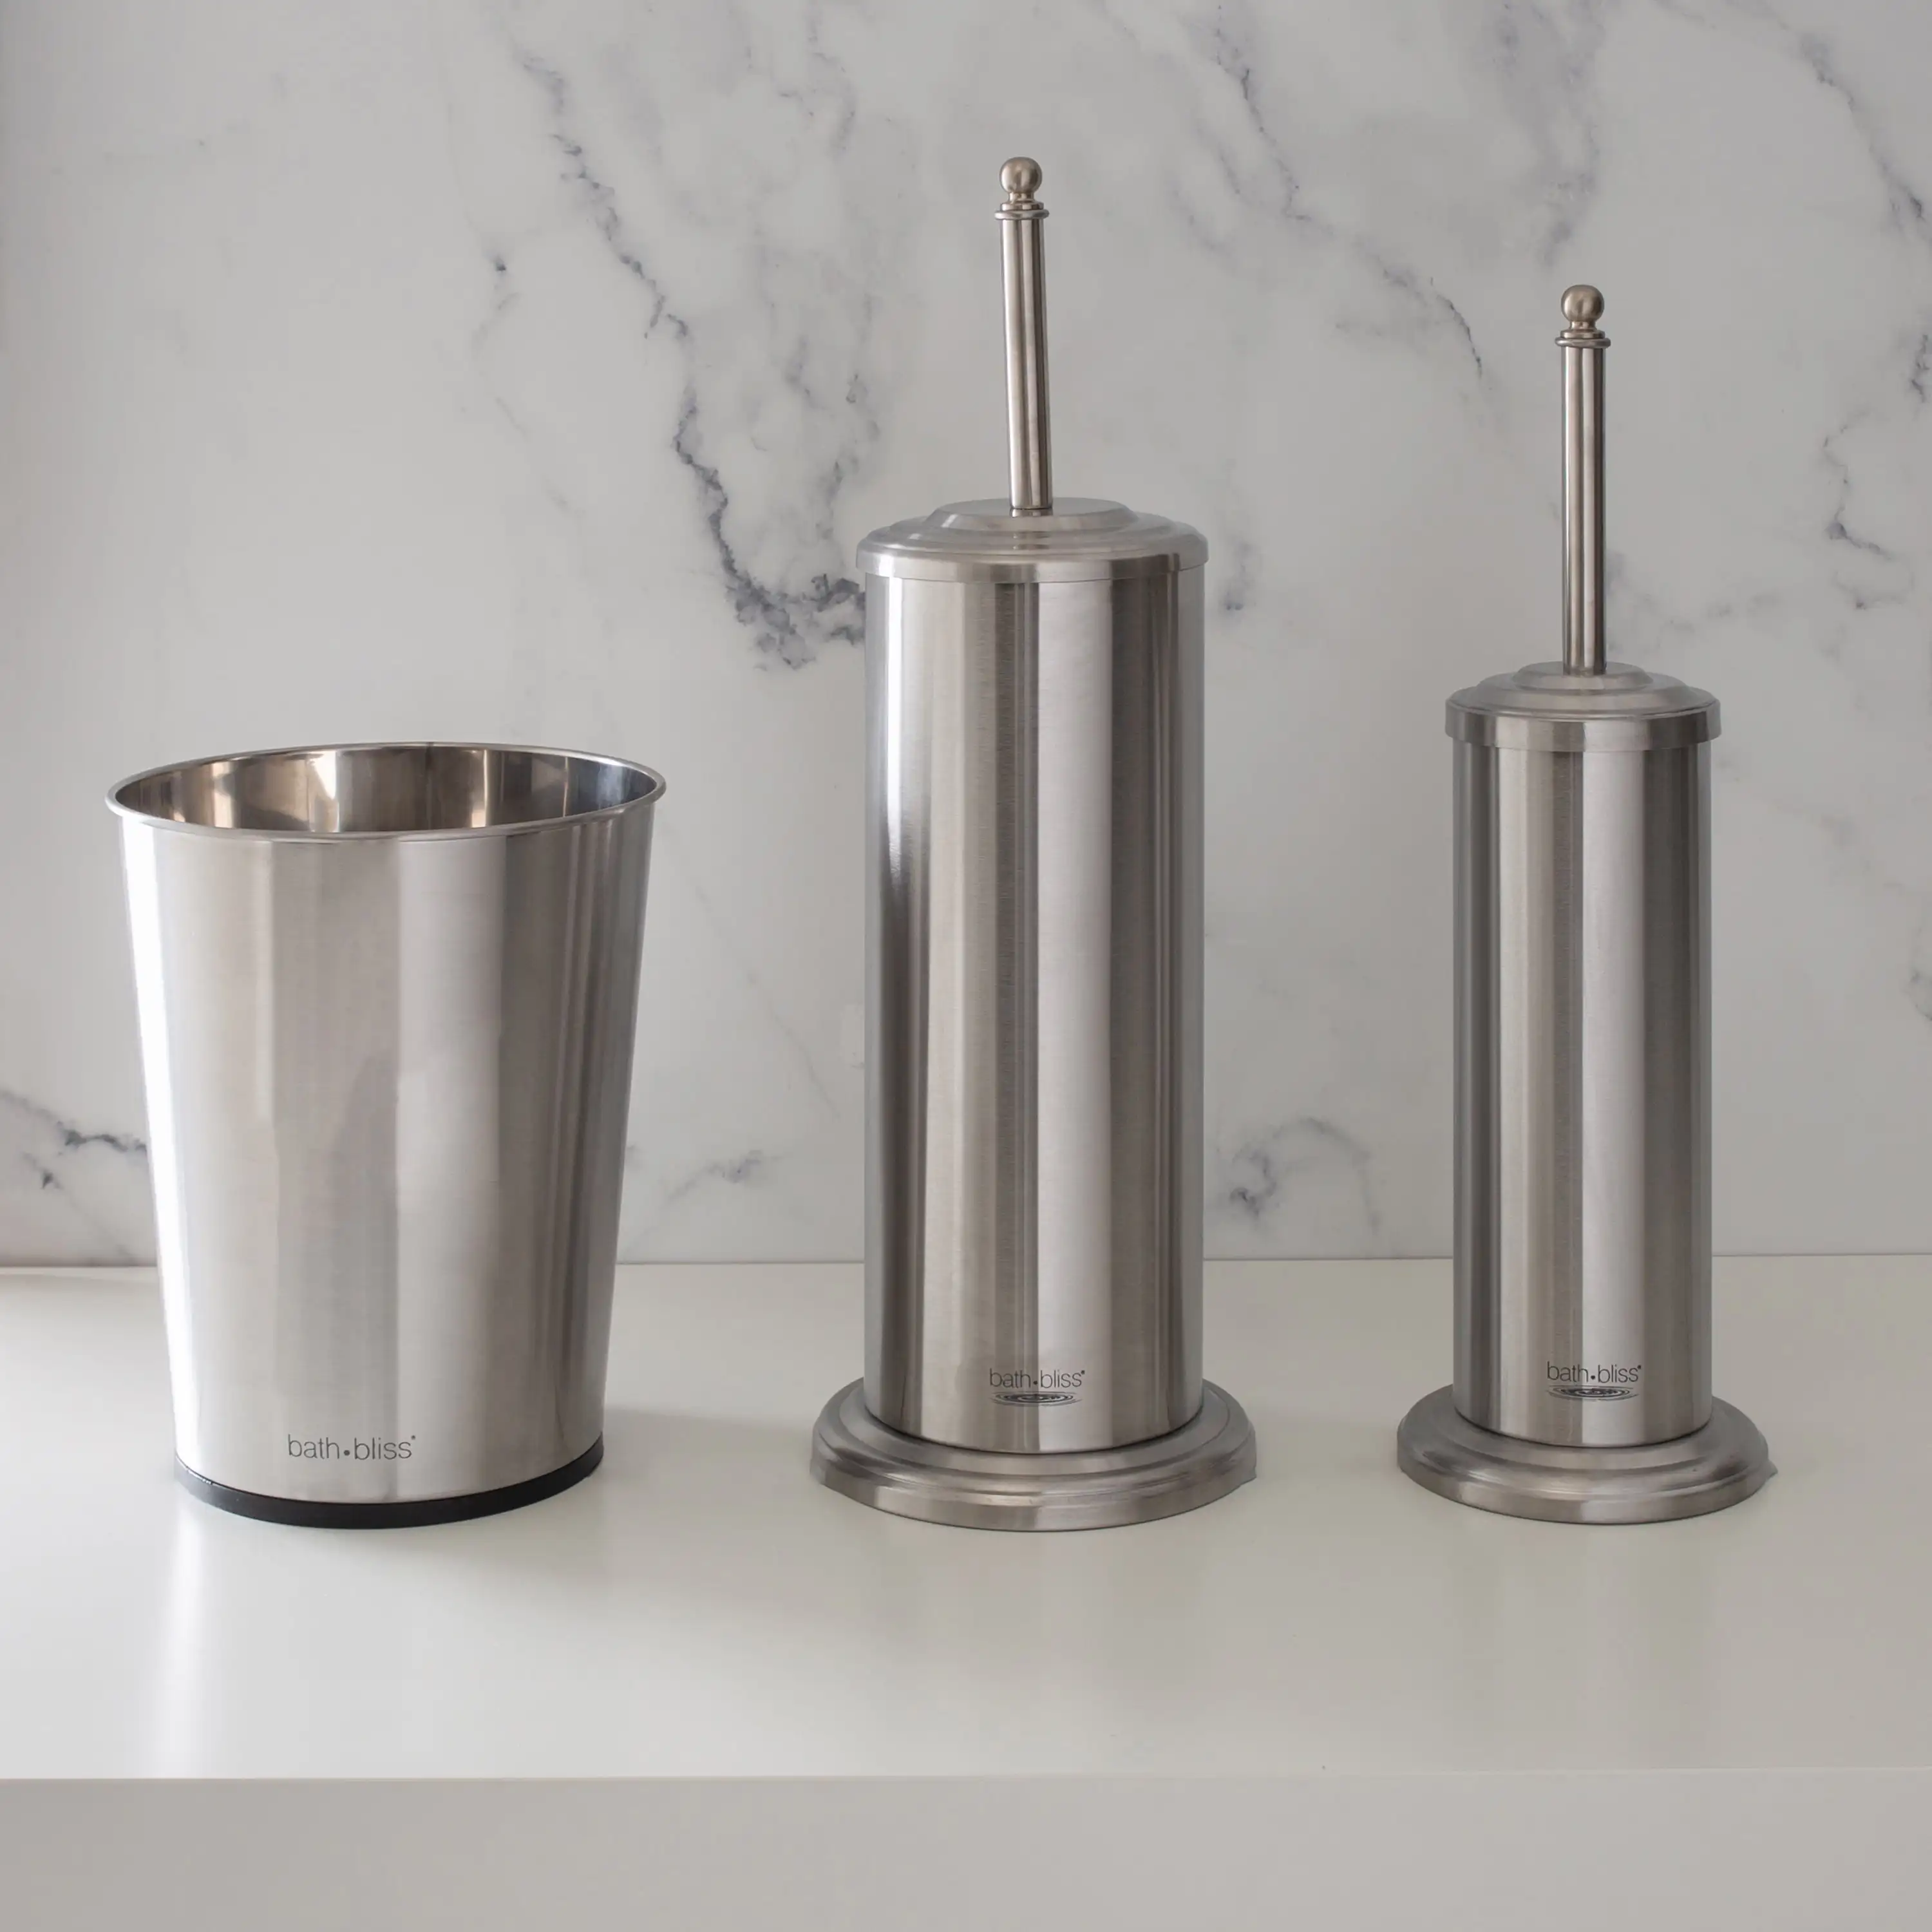 

Bath Bliss Stainless Steel Trash Can, Plunger, and Toilet Brush Iron Collection Set